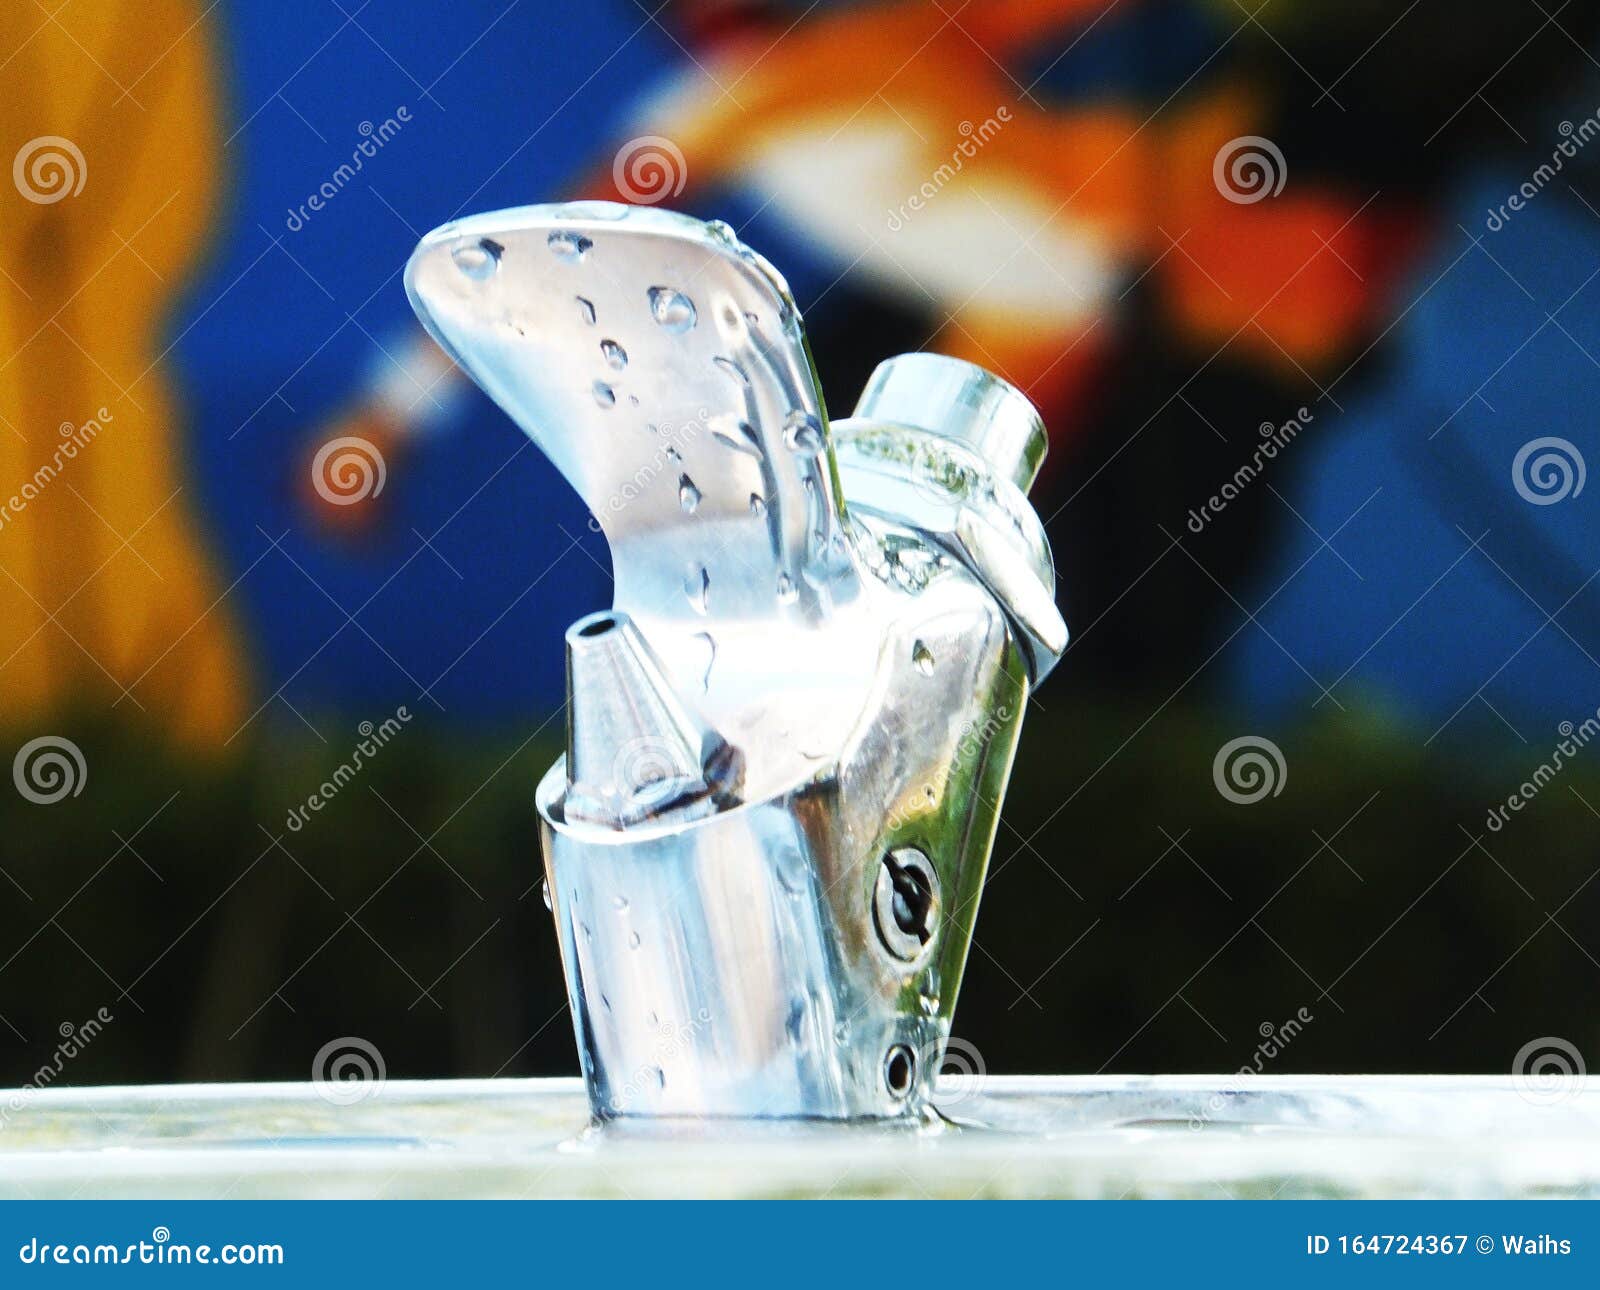 A Close Up Of A Stainless Steel Faucet Stock Image Image Of Asia